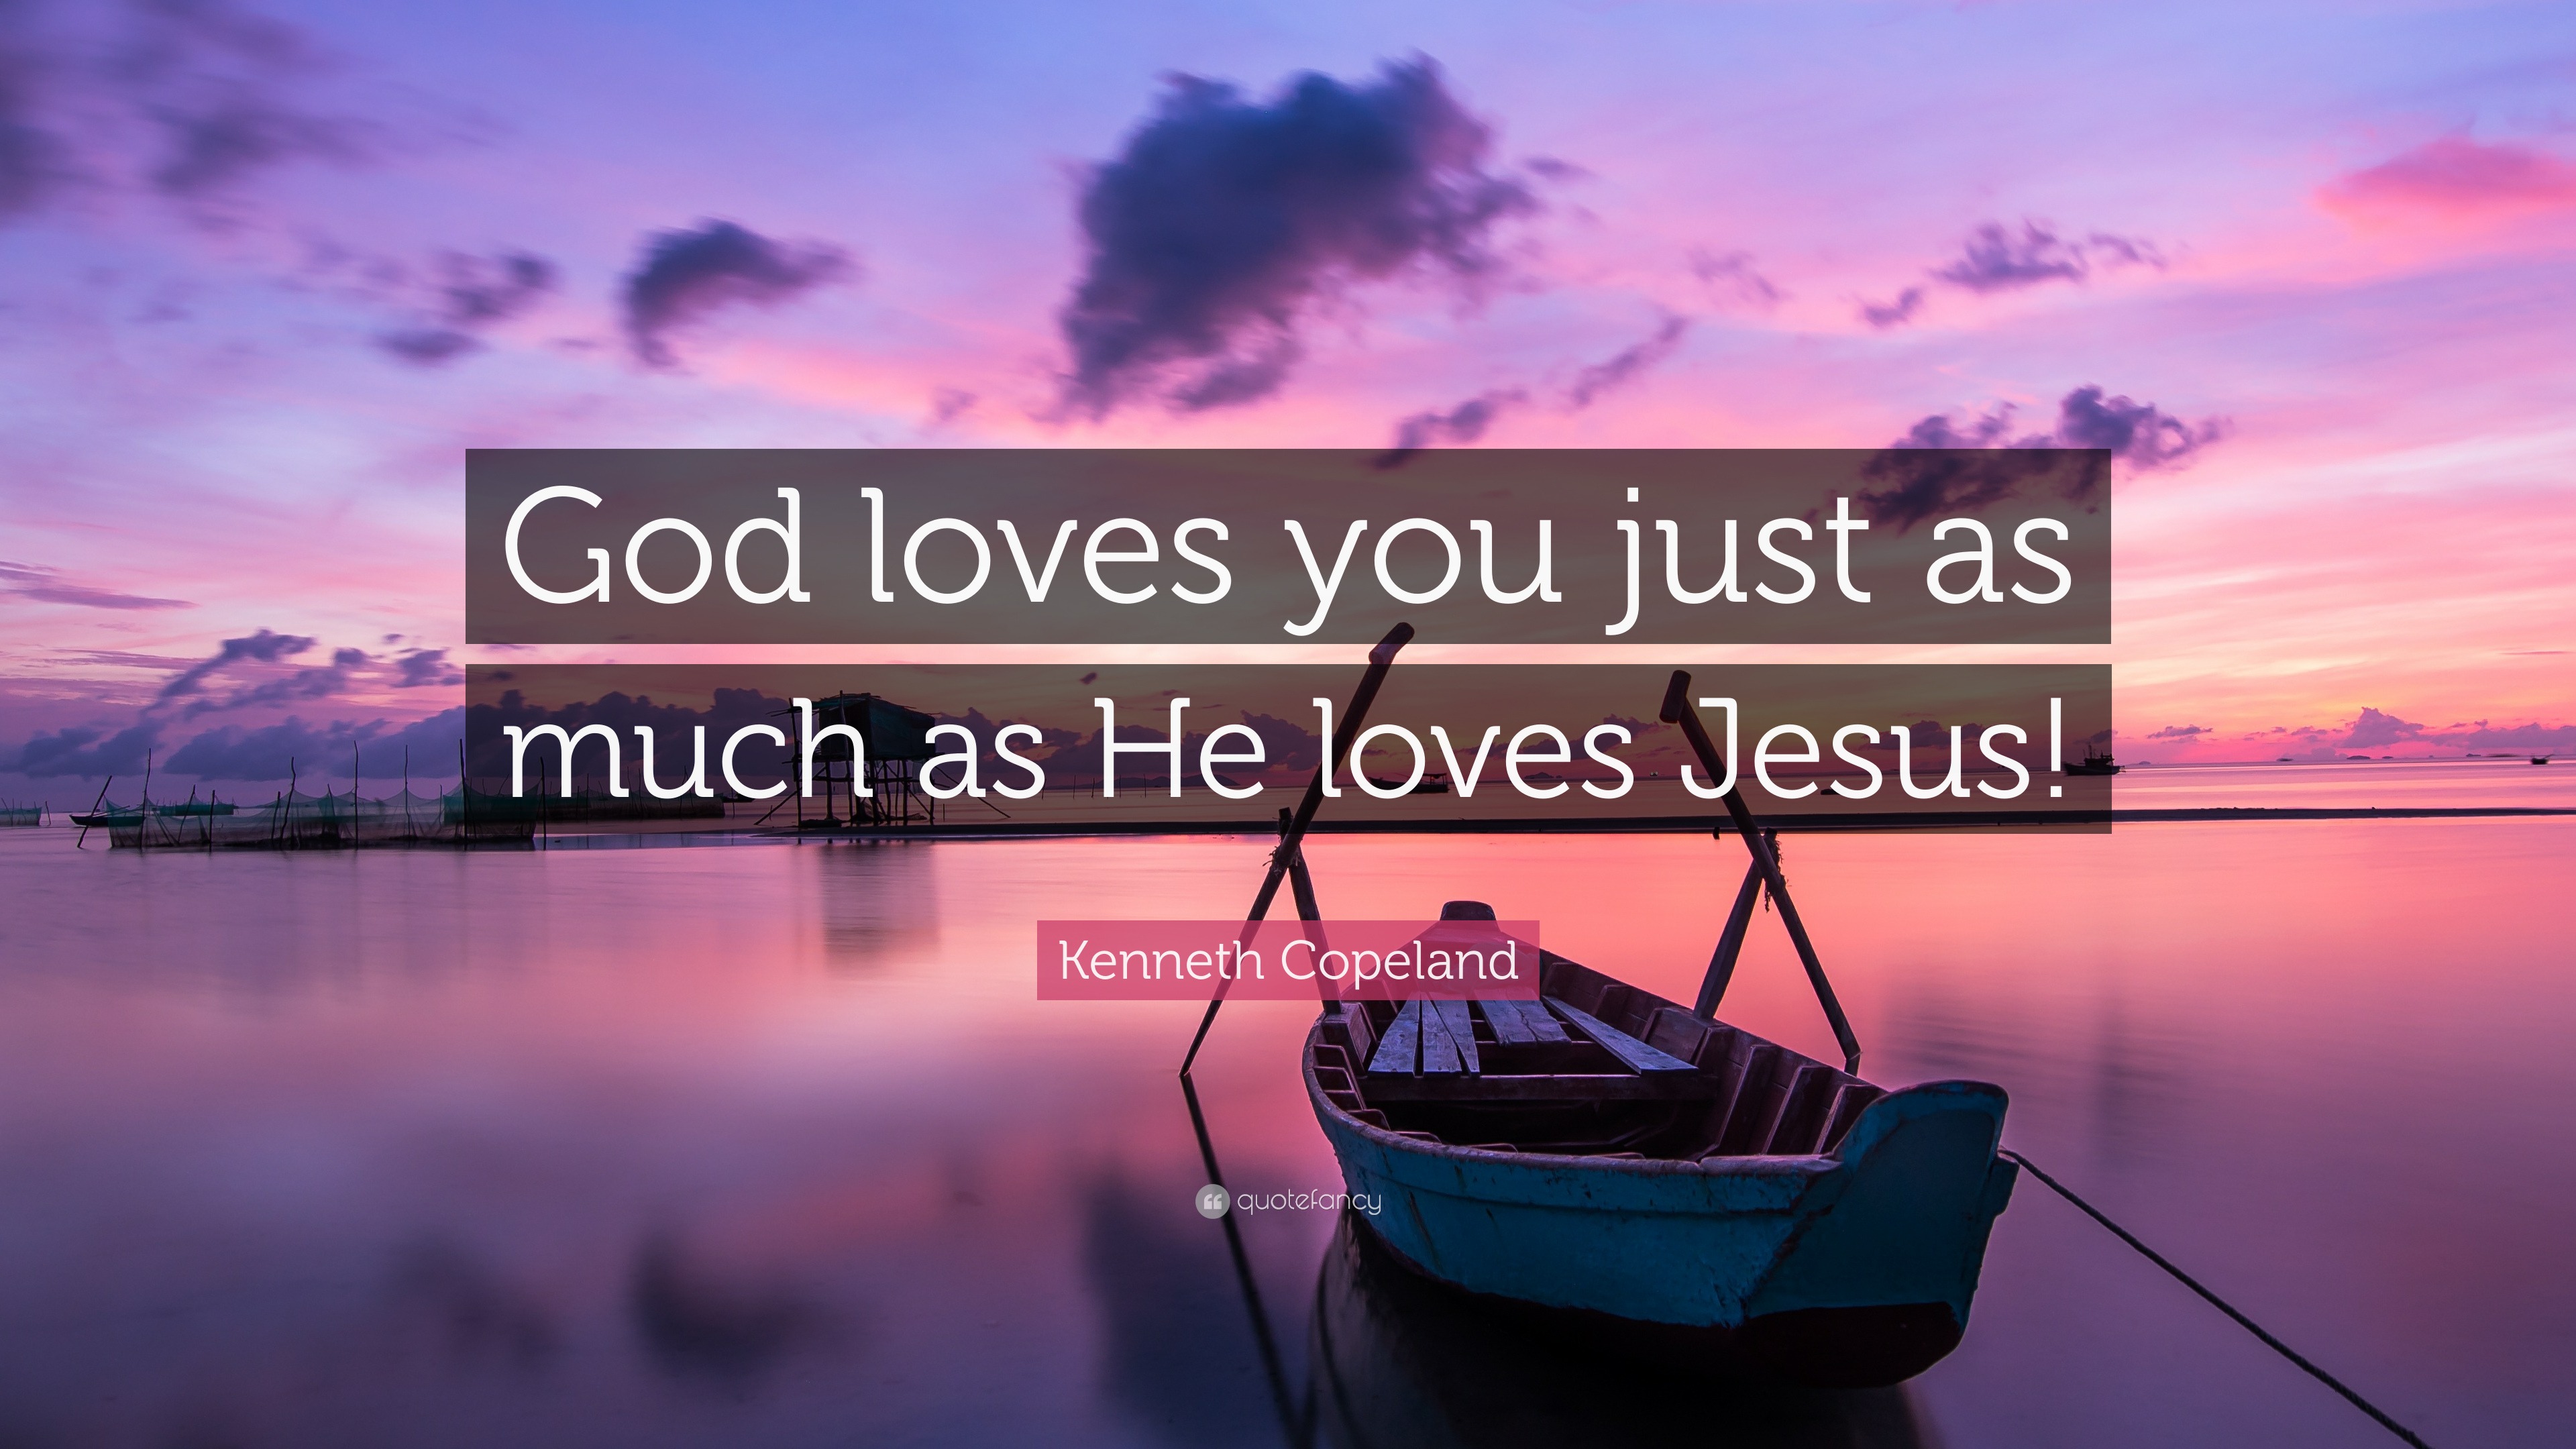 Kenneth Copeland Quote “god Loves You Just As Much As He Loves Jesus 